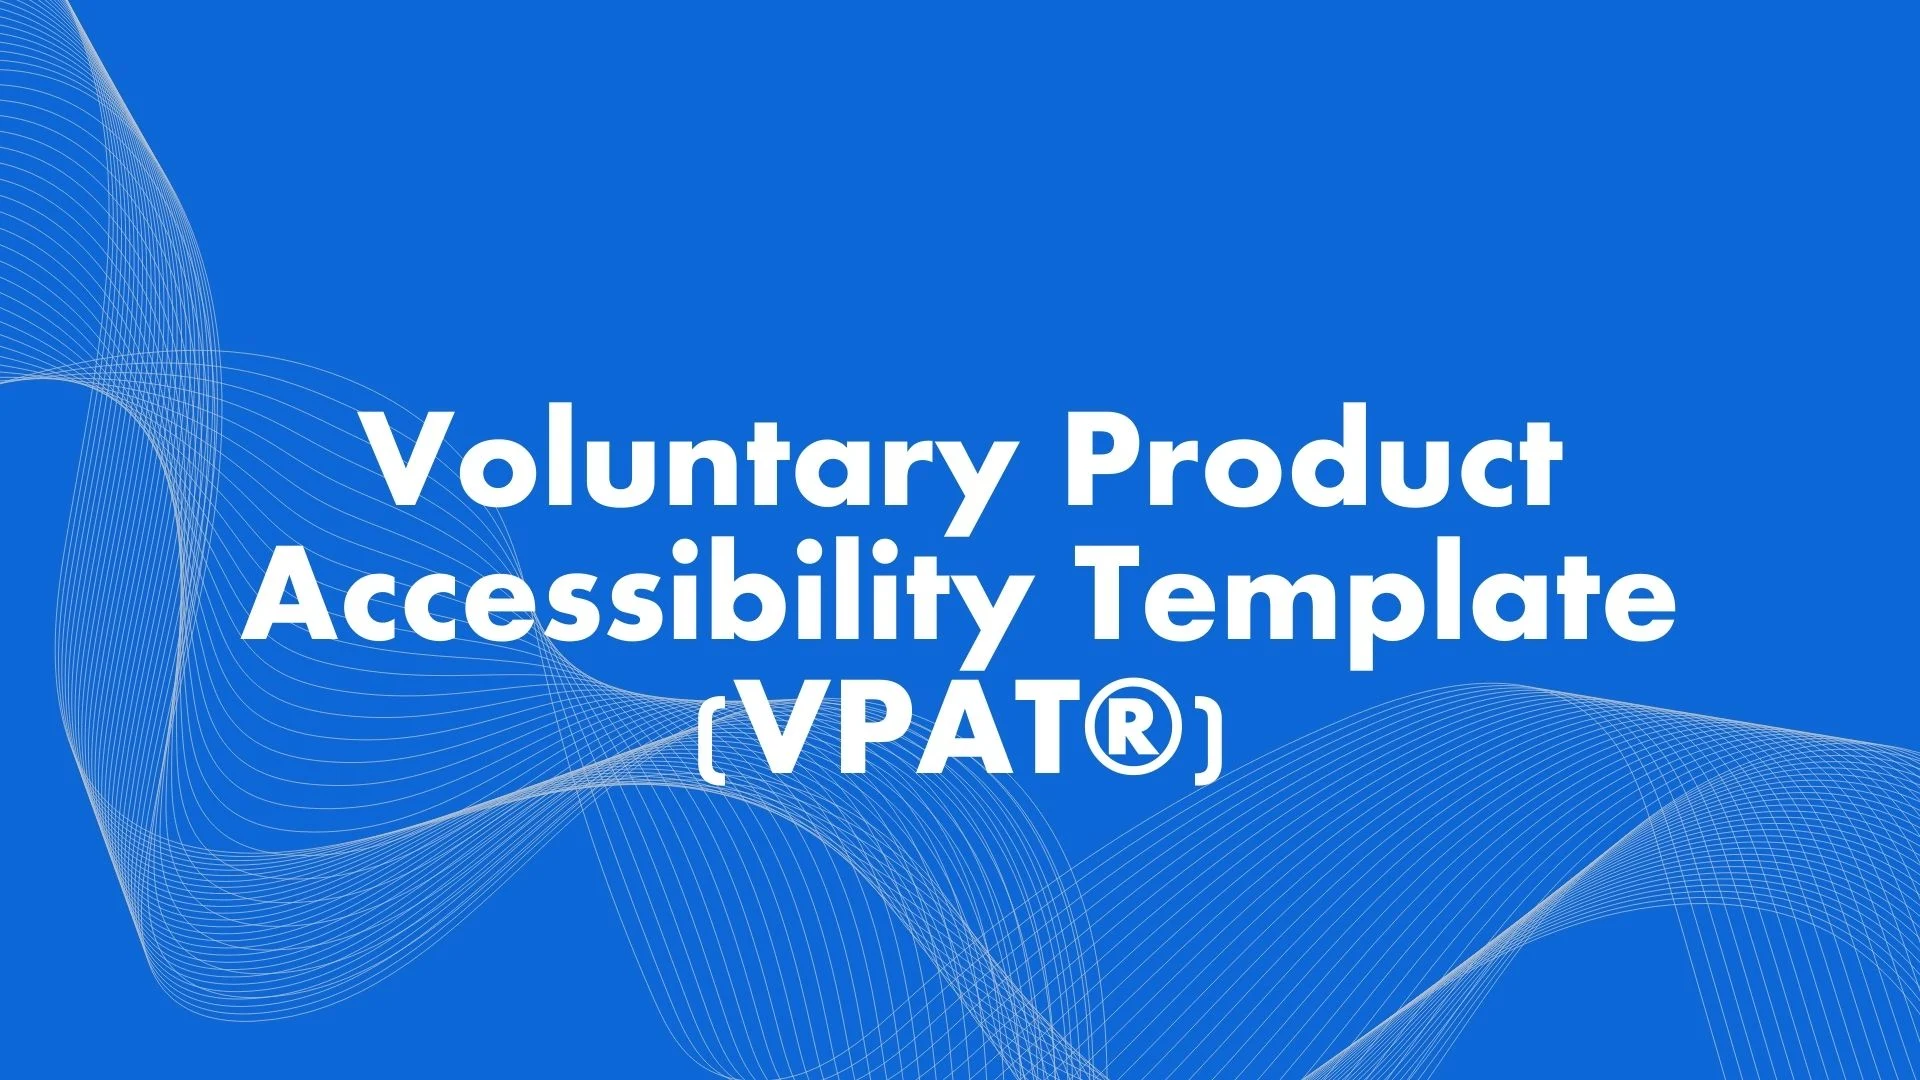 Voluntary Product Accessibility Template (VPAT®)